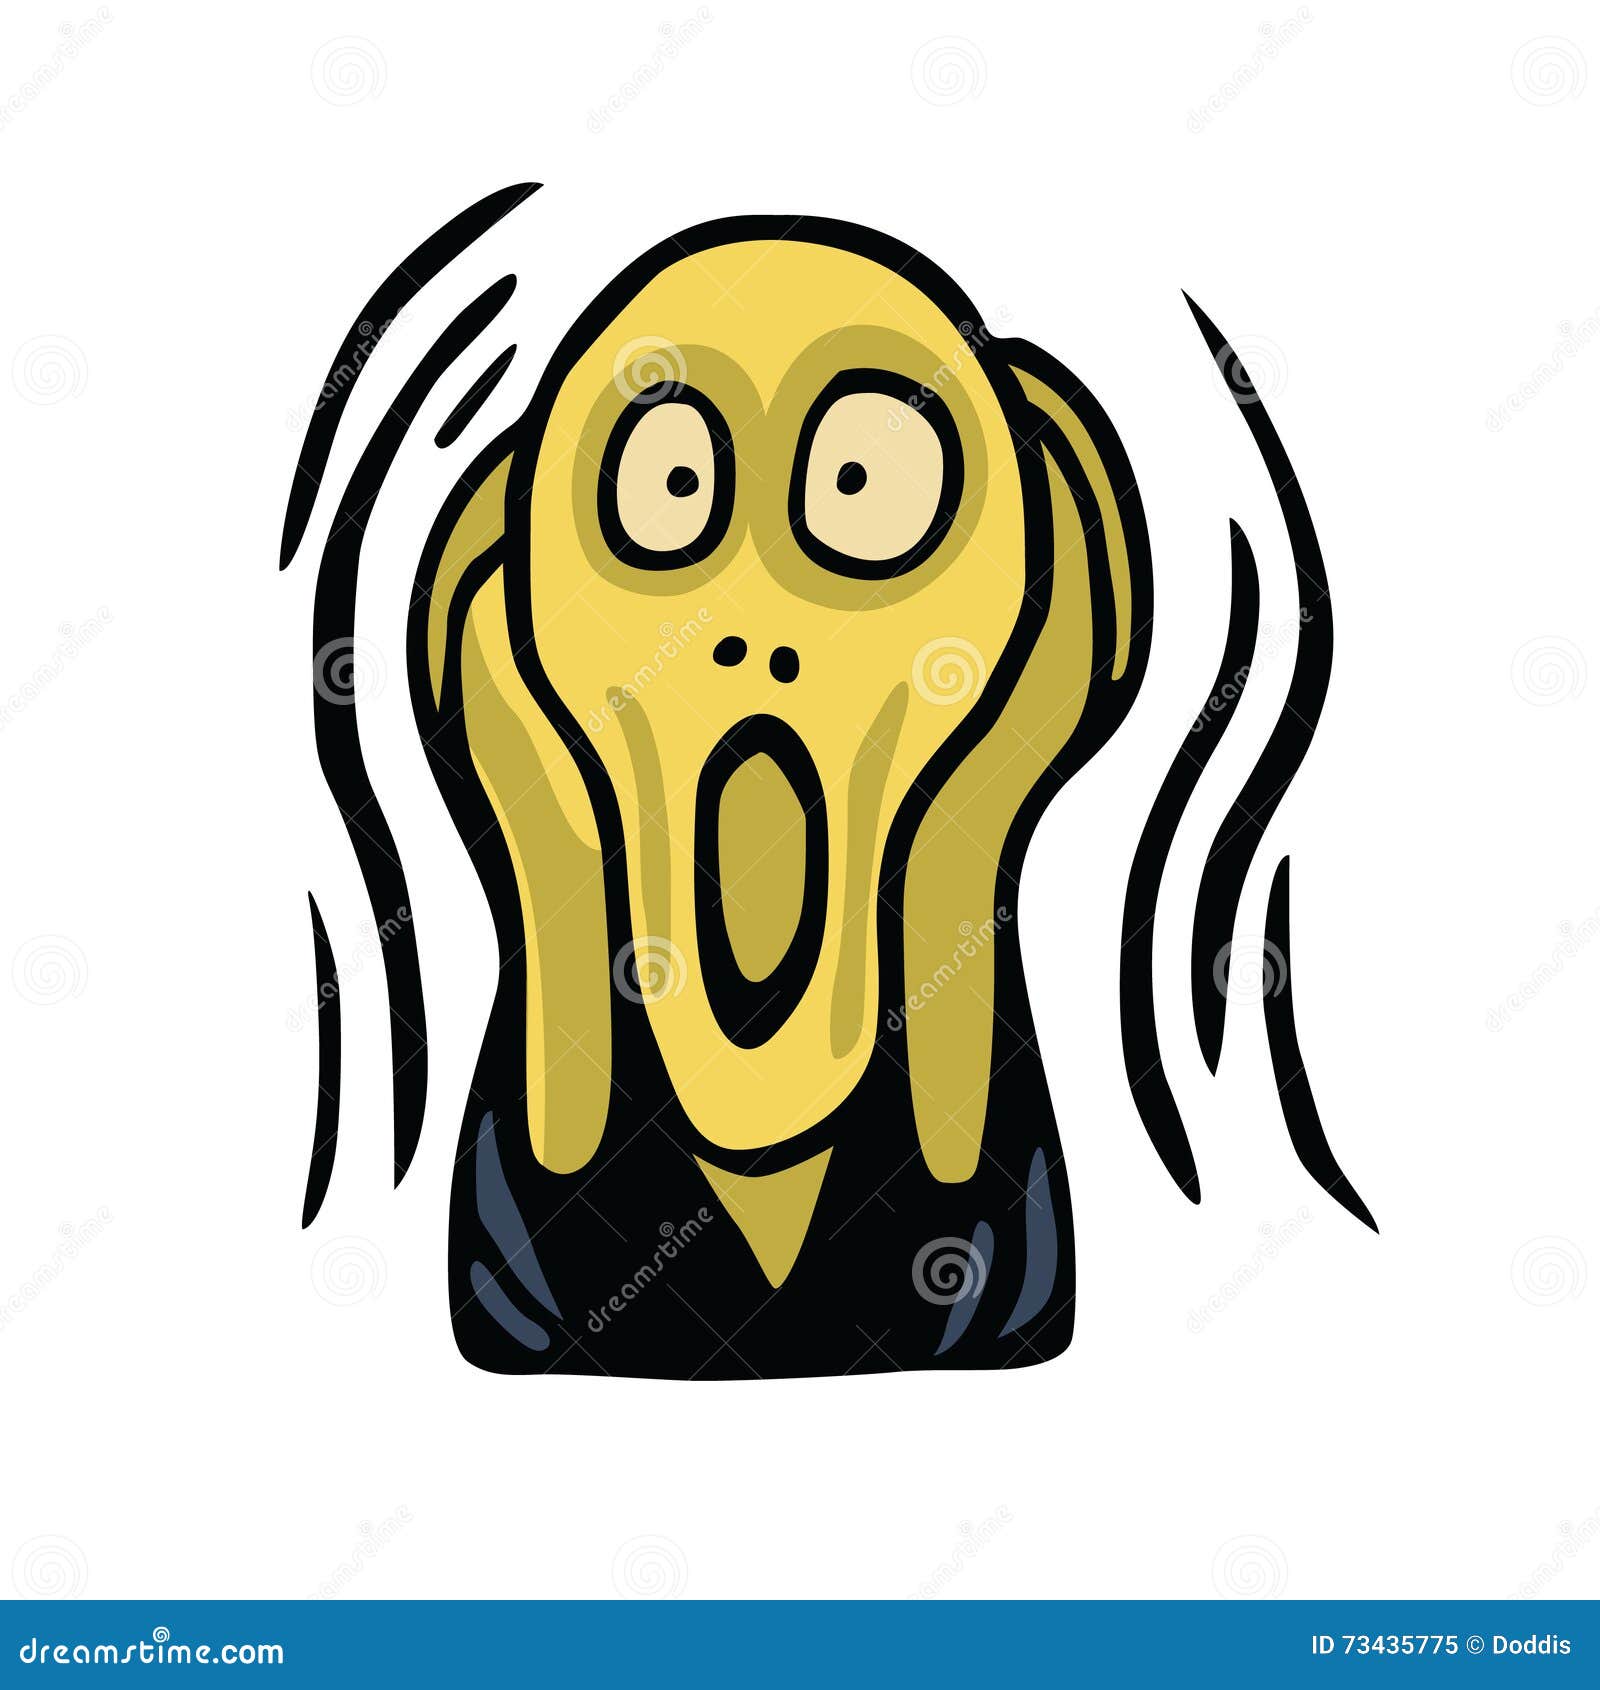 Scream Cartoons, Illustrations & Vector Stock Images - 48309 Pictures